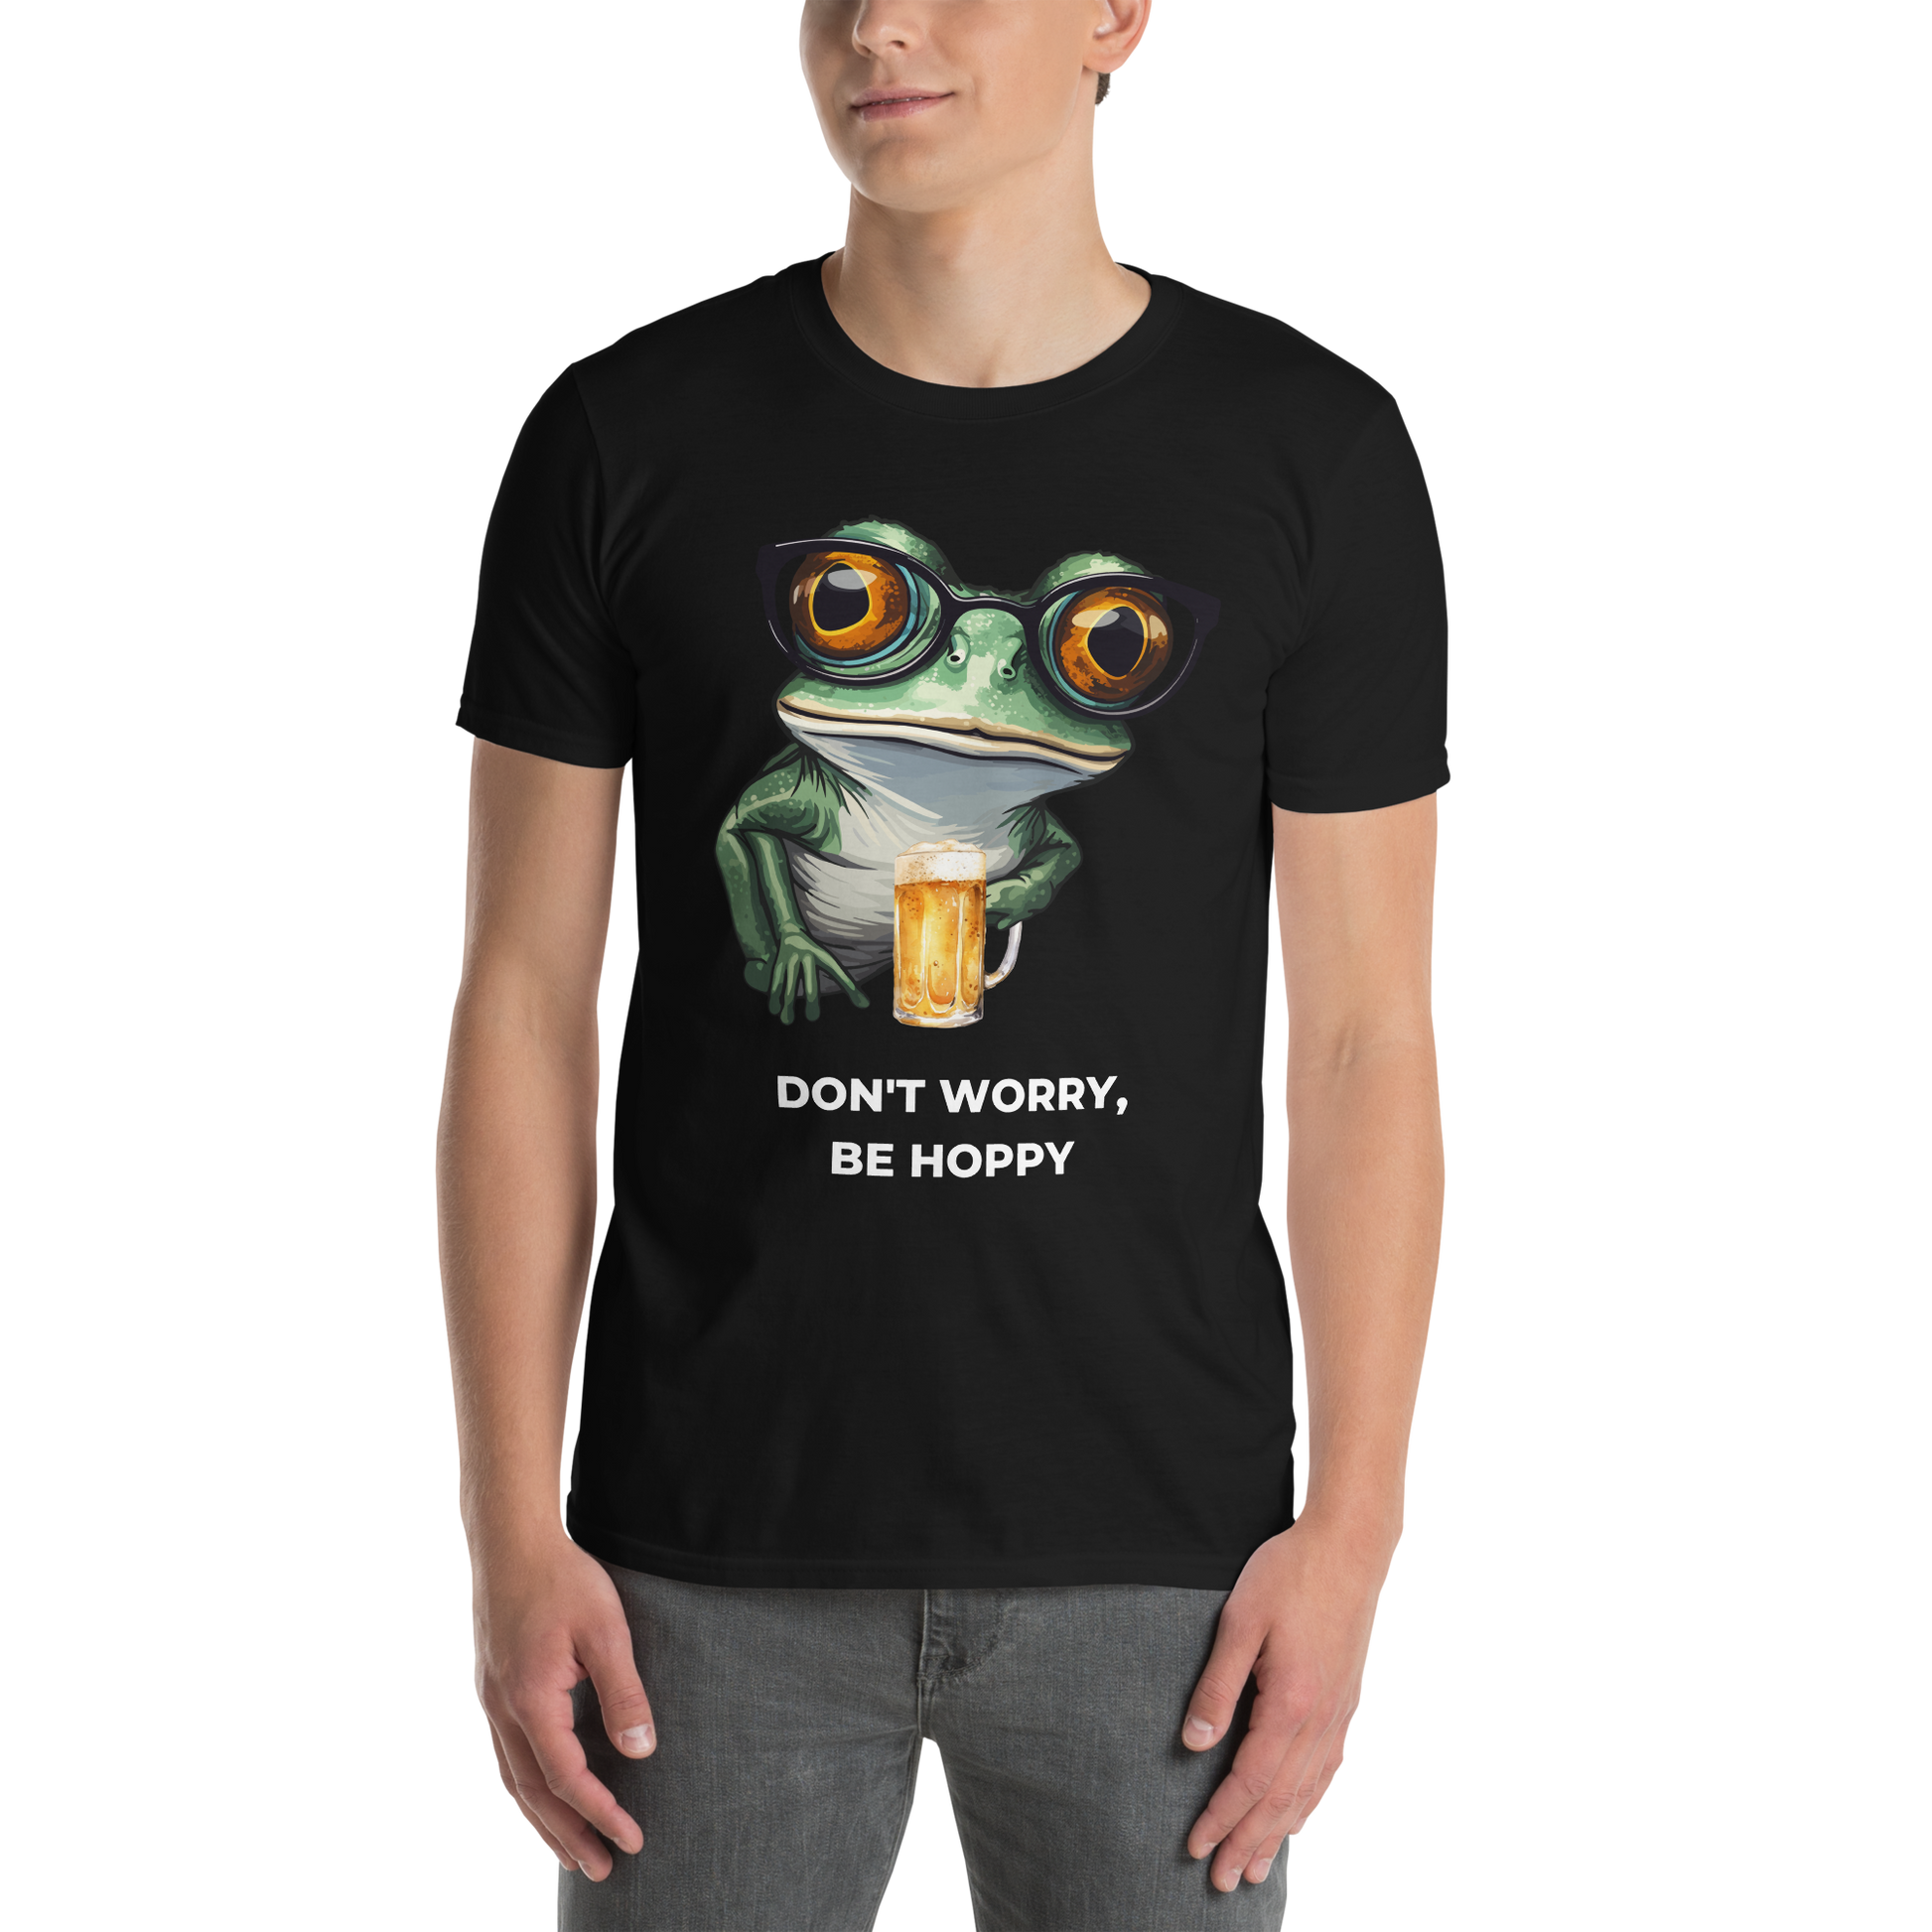 Man wearing a Black Frog T-Shirt featuring a ribbitting Don't Worry, Be Hoppy graphic on the chest - Funny Graphic Frog T-Shirts - Boozy Fox